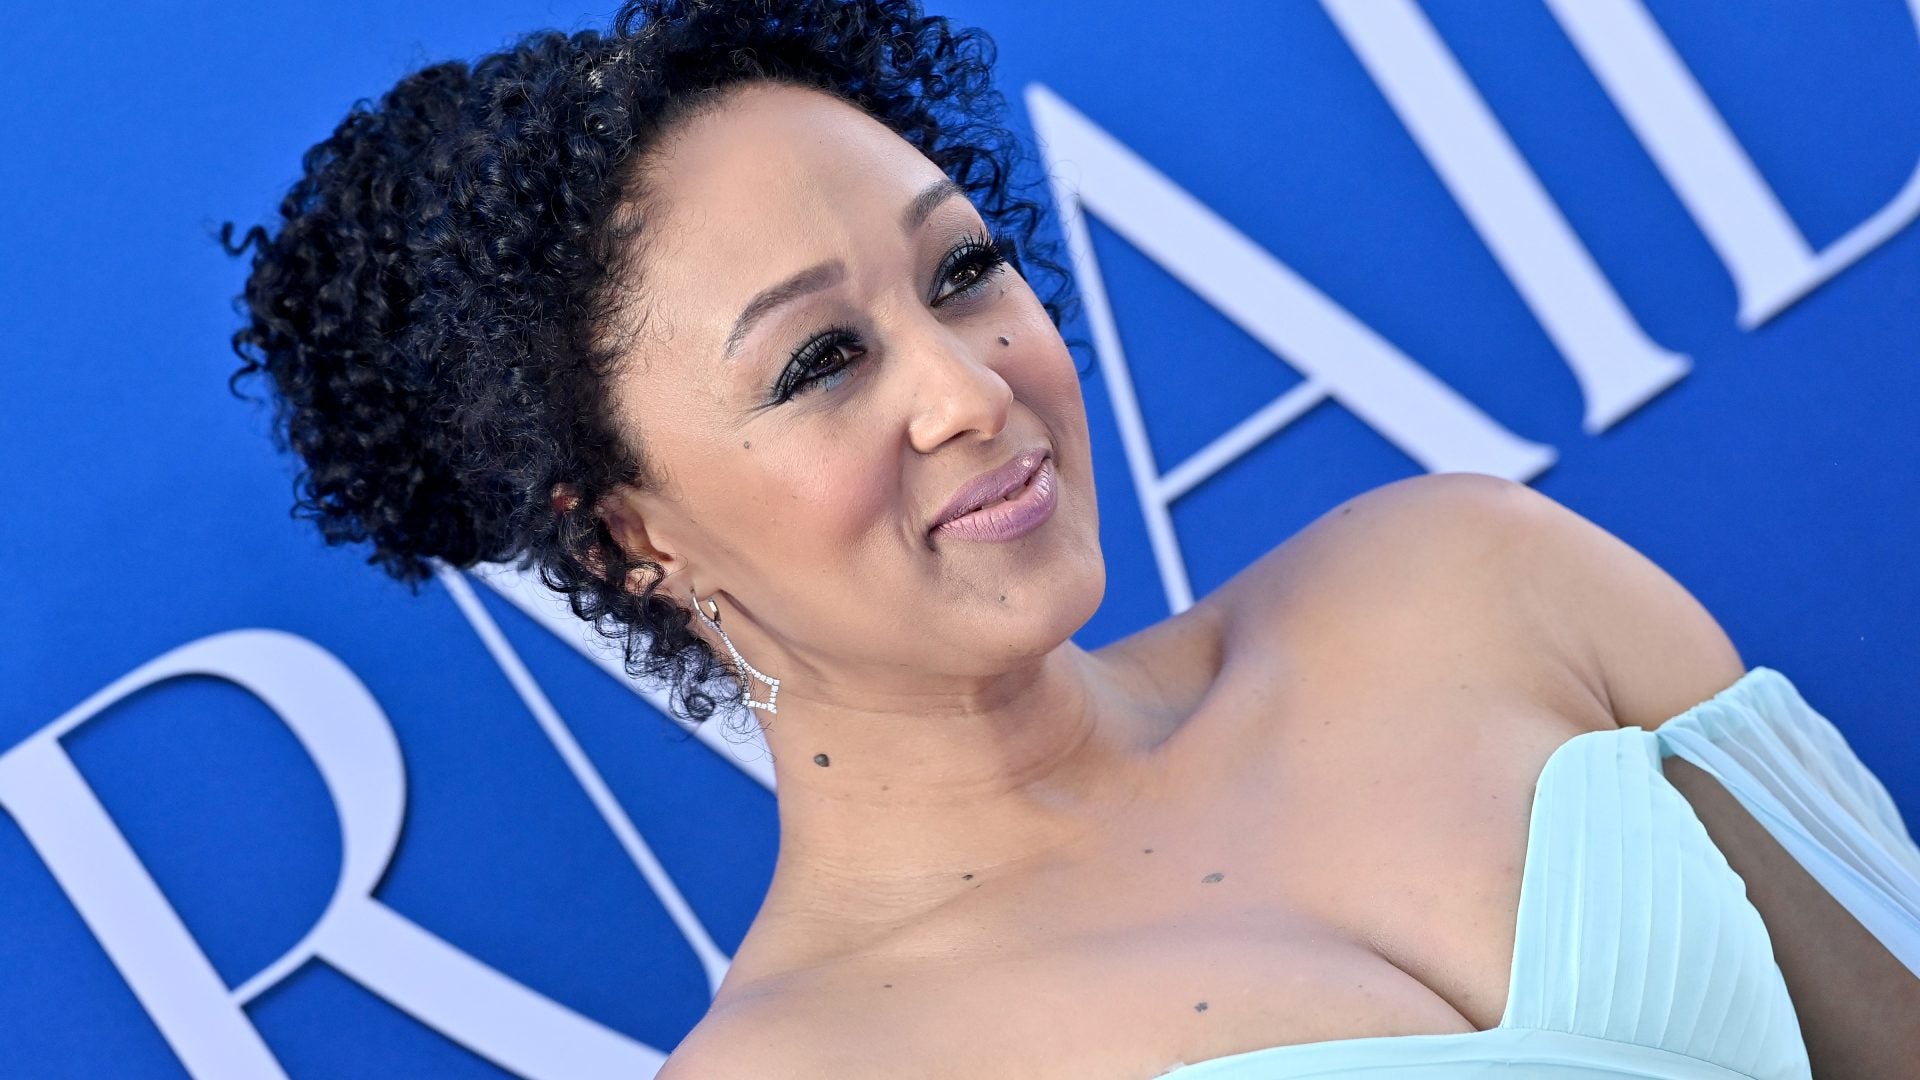 ‘A Perfect Mom Does Not Exist’: Tamera Mowry-Housley On Parenthood And Practicing Unconventional Self-Care